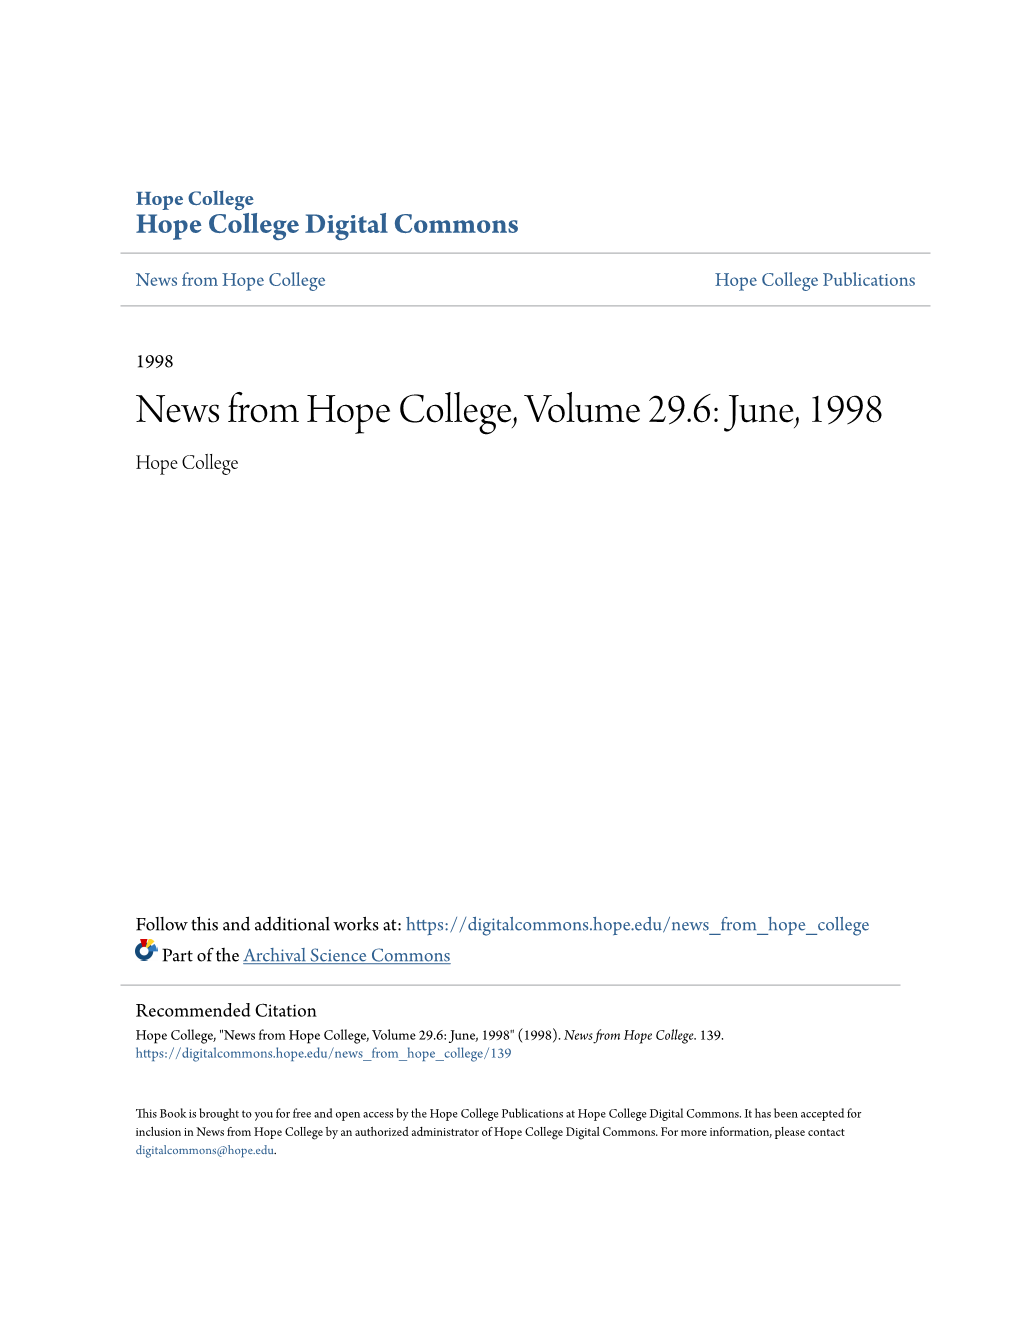 News from Hope College, Volume 29.6: June, 1998 Hope College